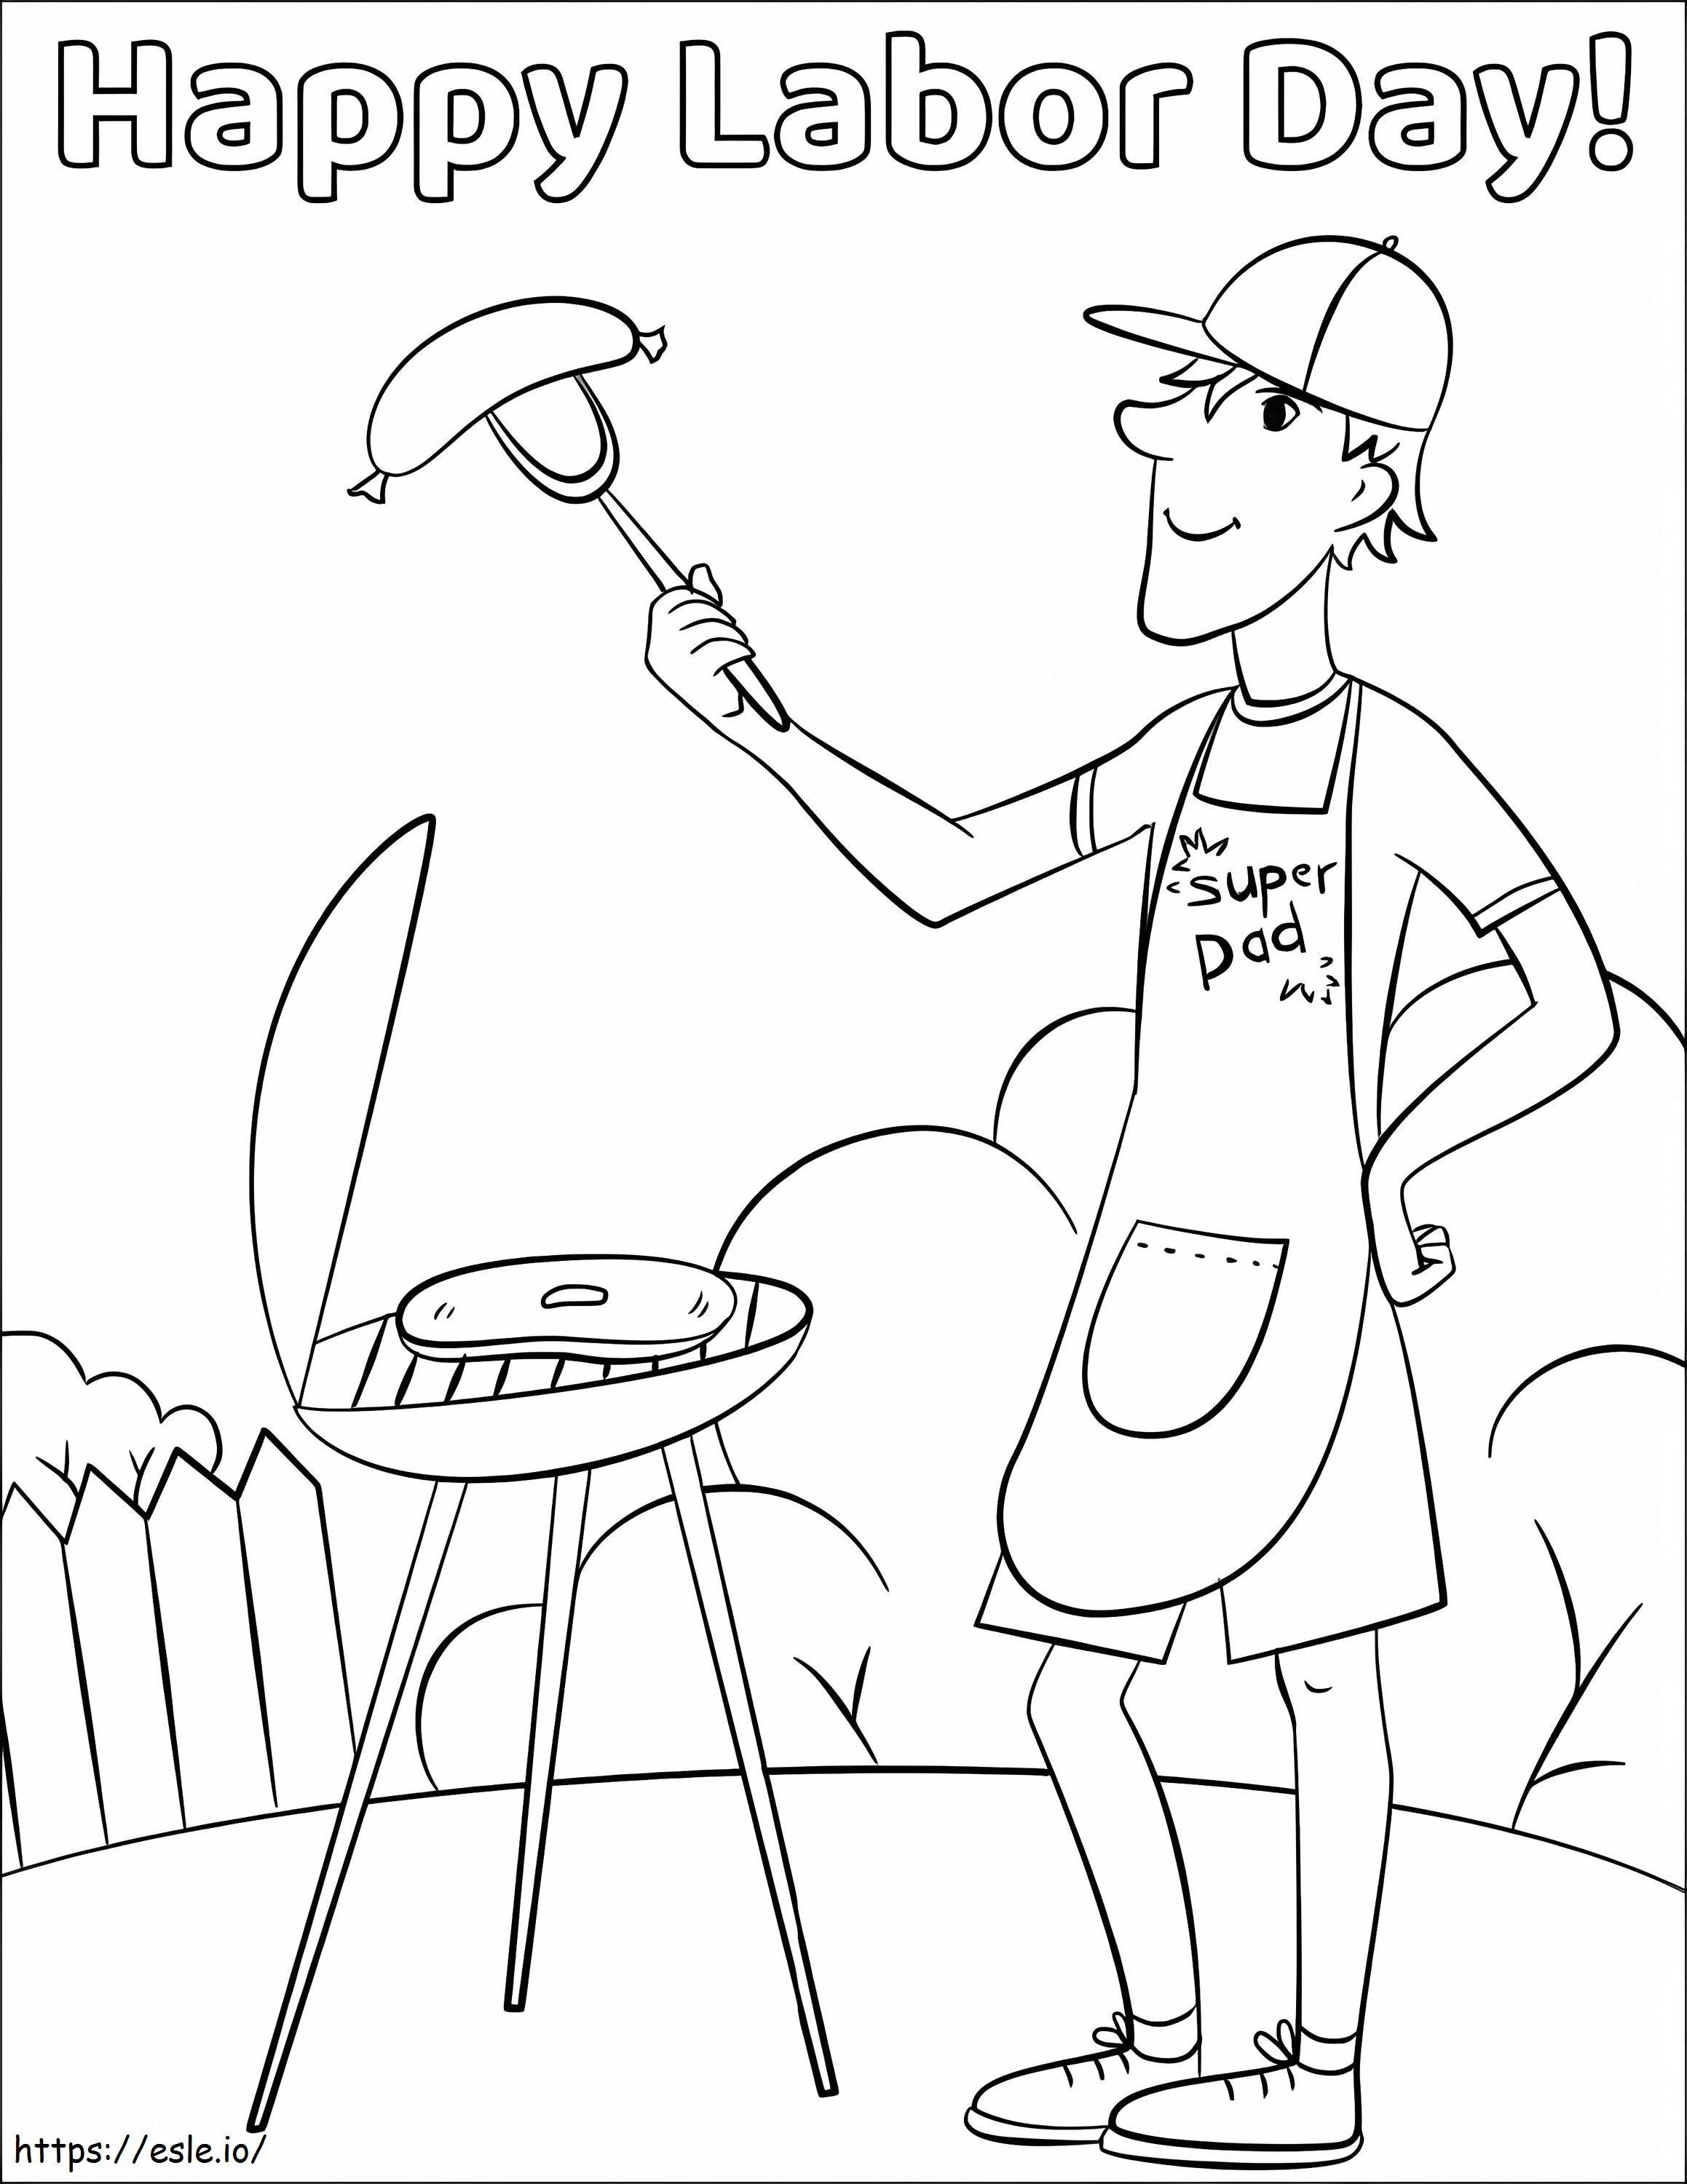 Happy Labor Day 1 coloring page